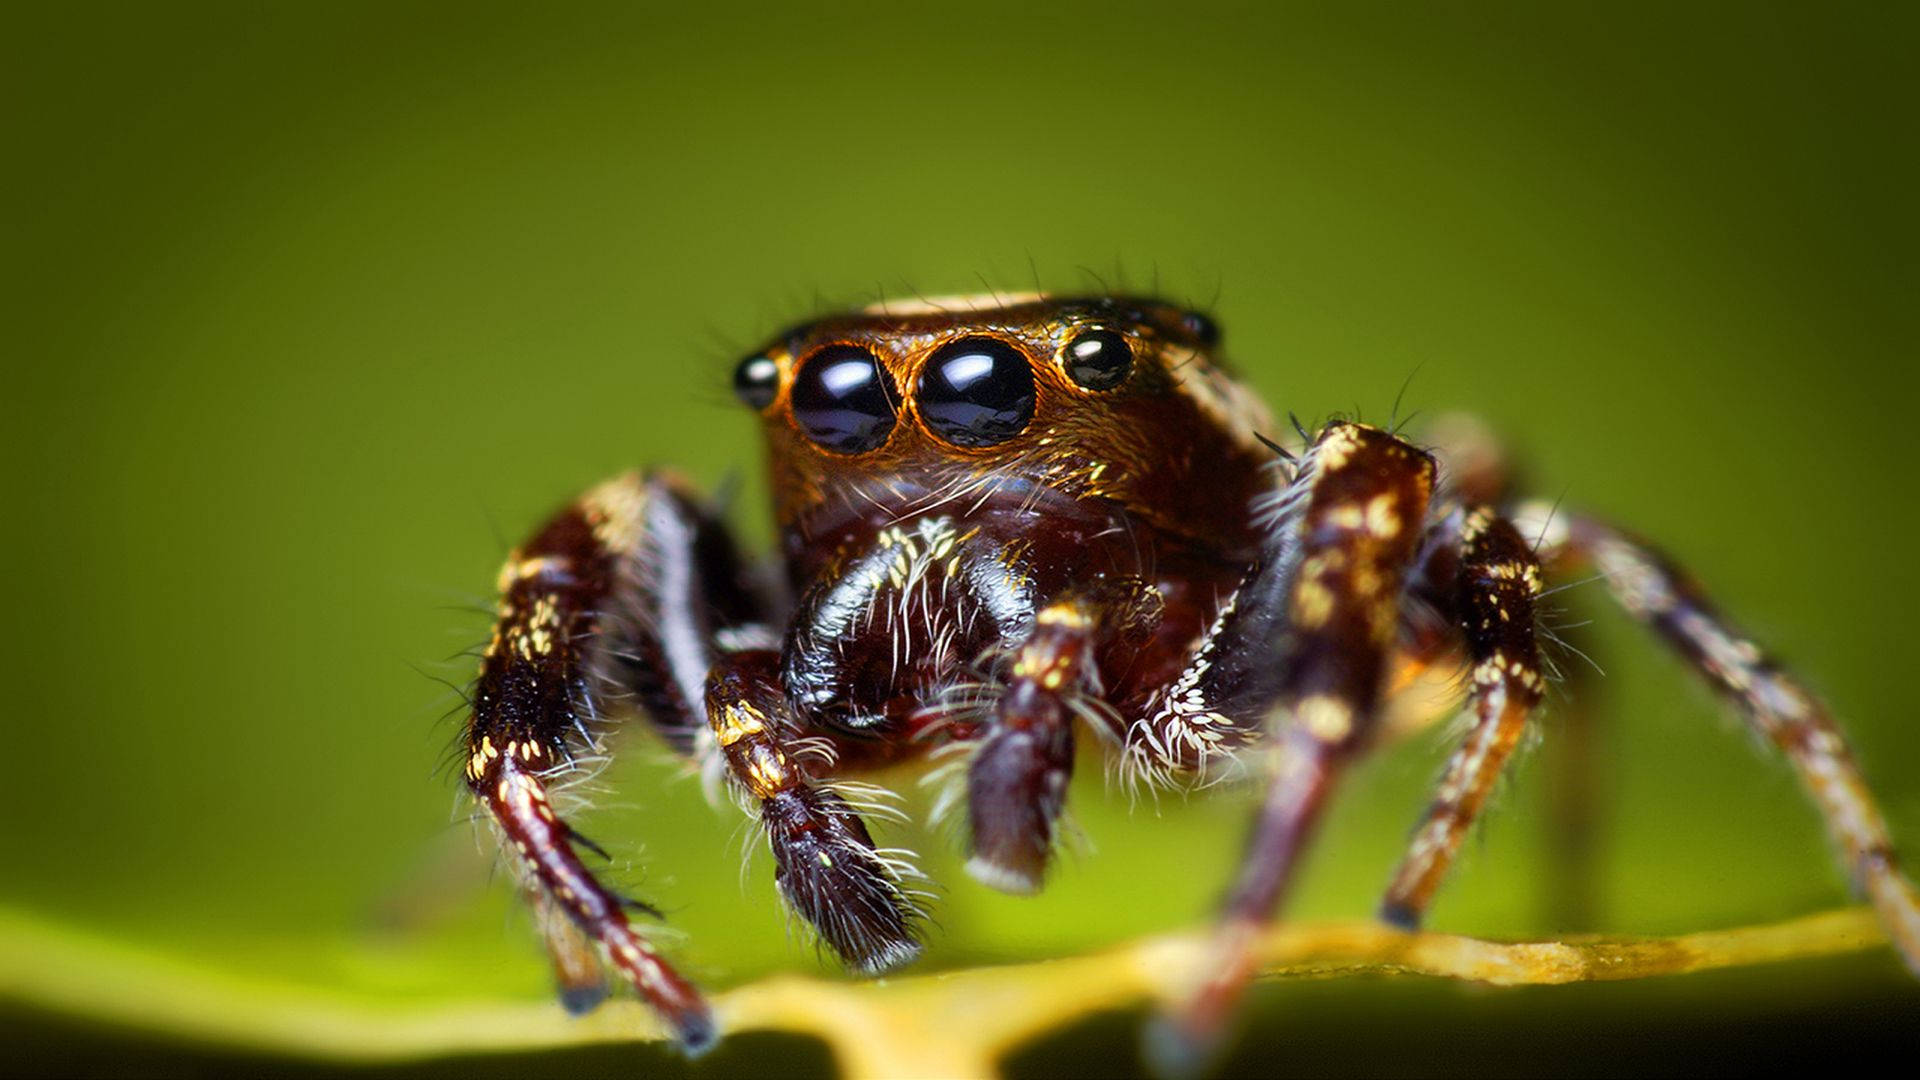 Insect Spider With Four Eyes